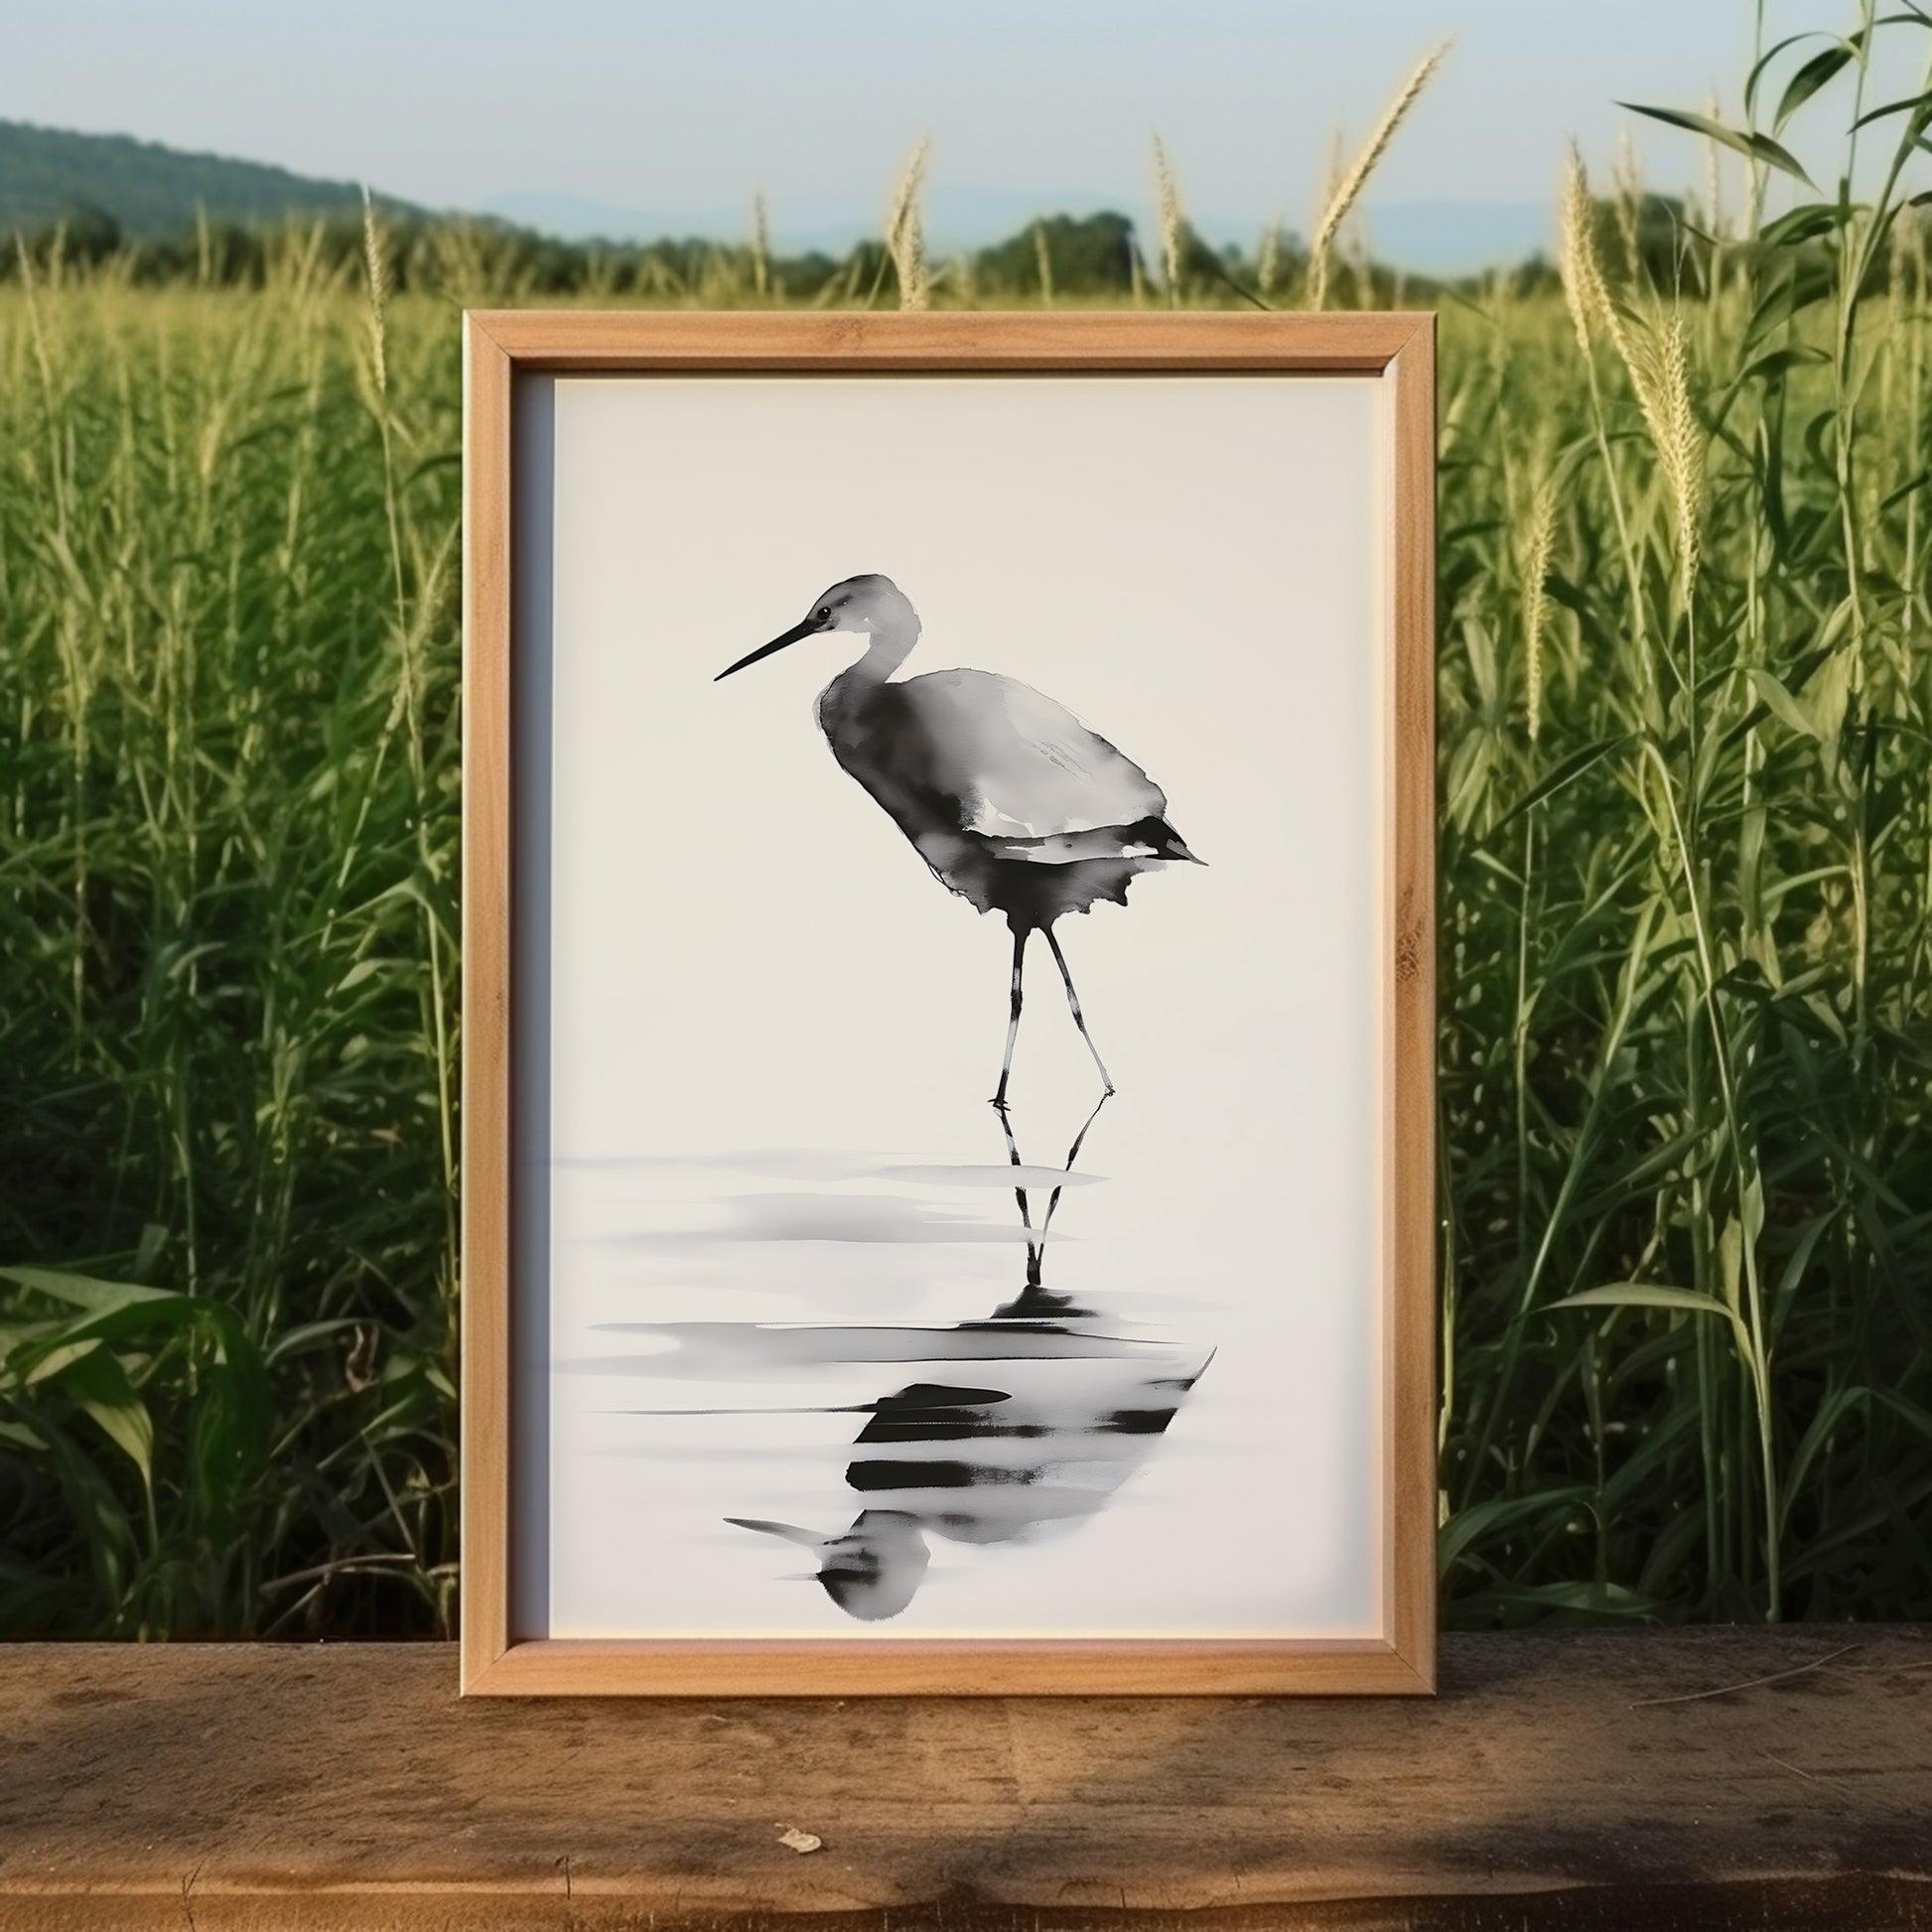 A framed black and white painting of a stork reflected in water, set against a grassy background.